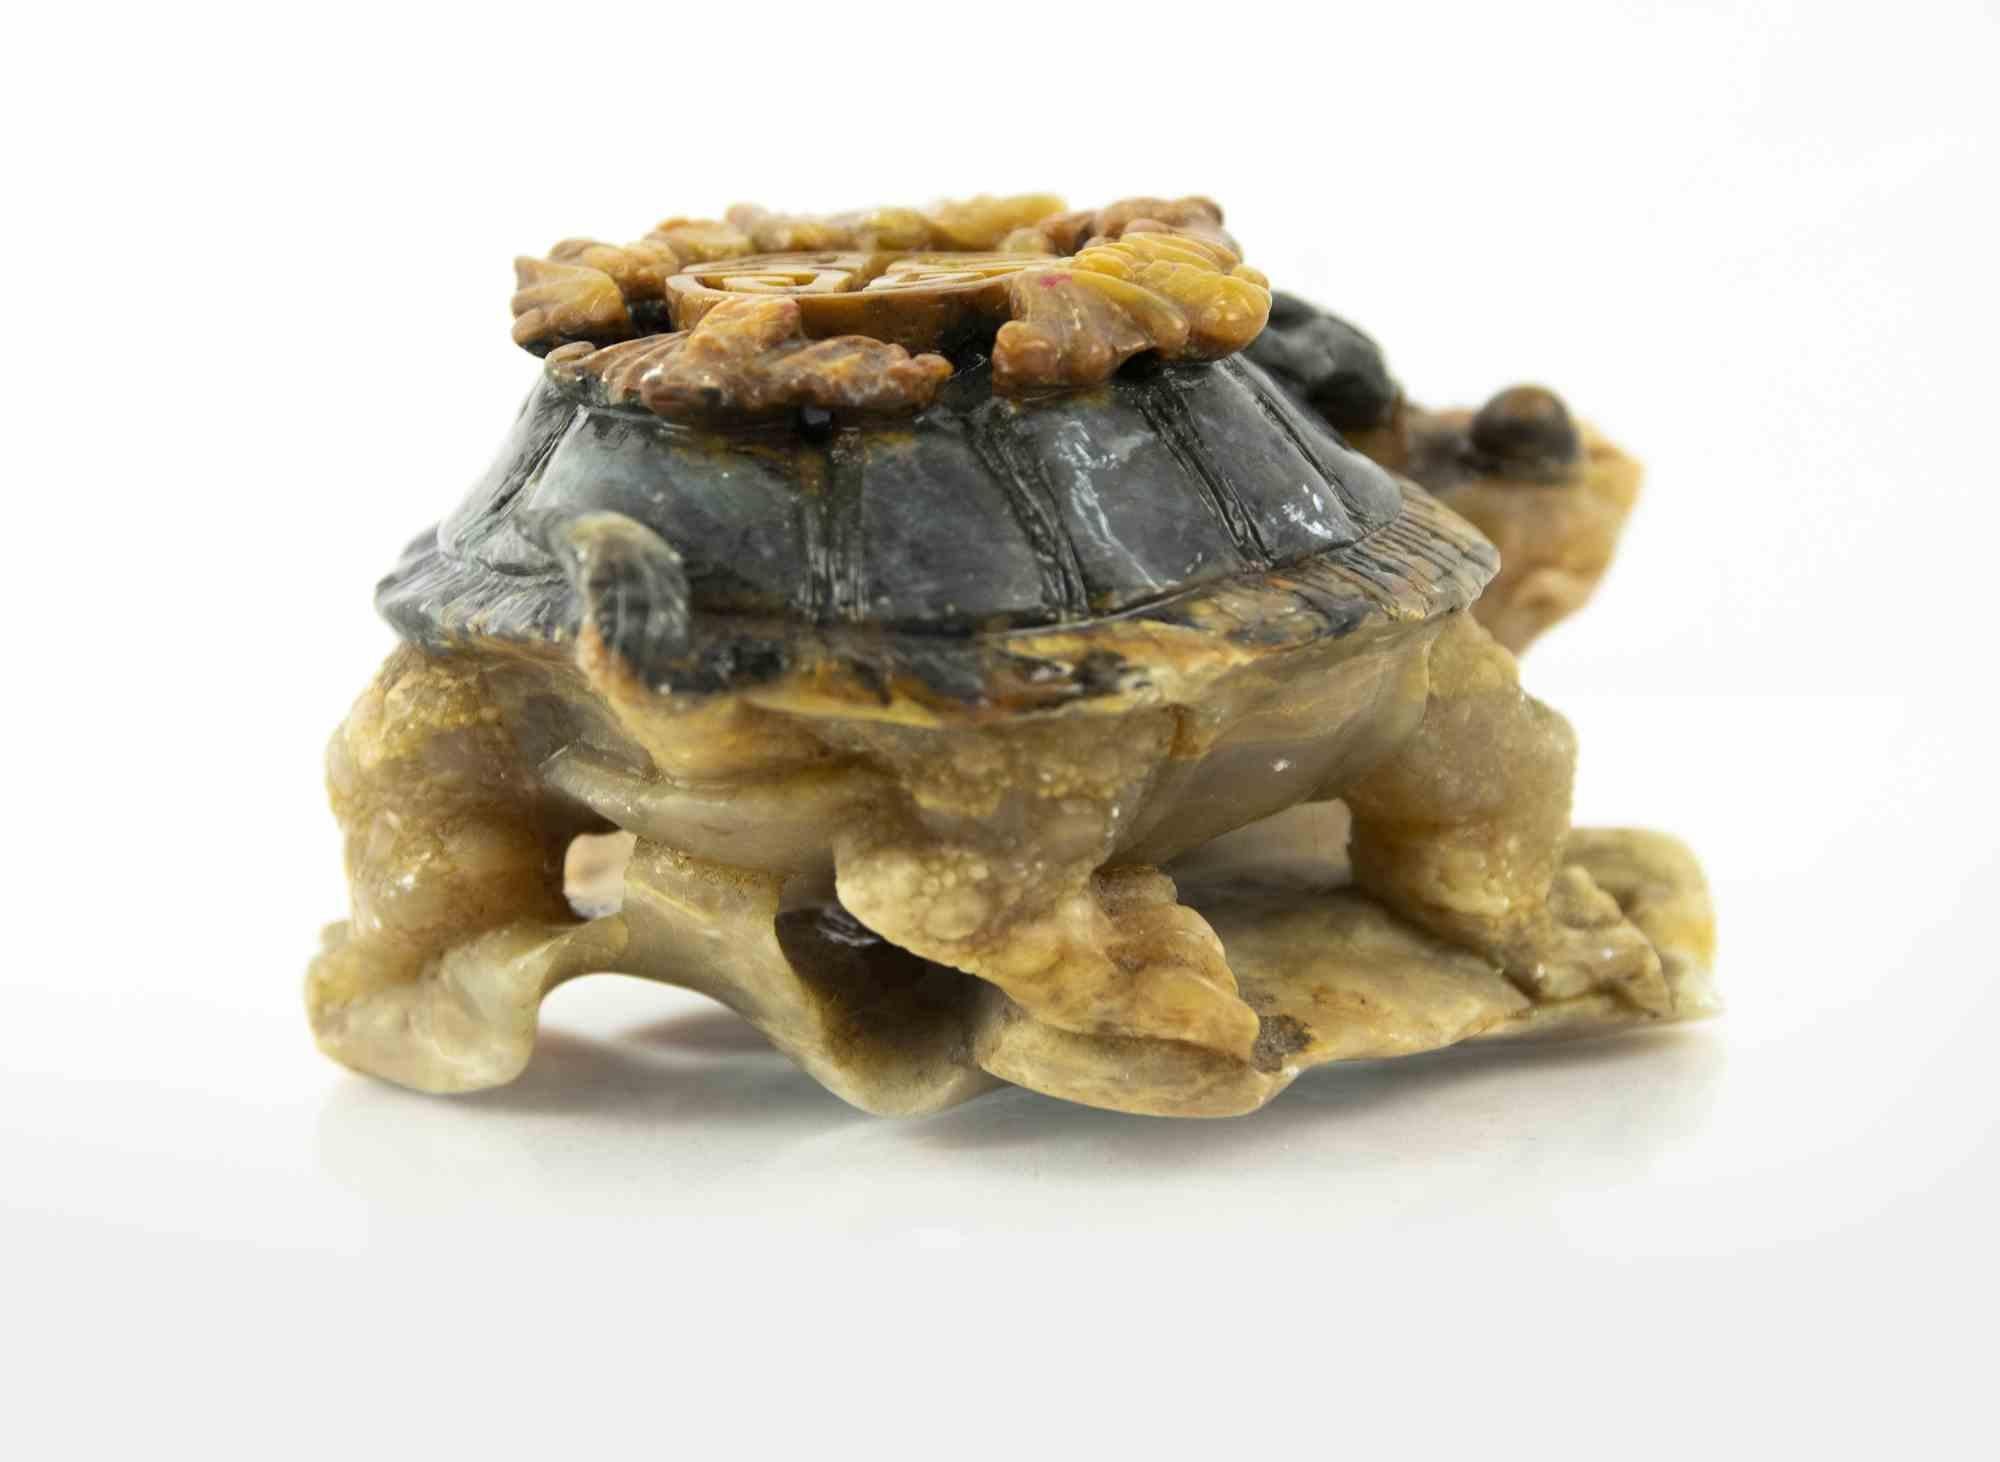 Turtle paperweight is a decorative object realized in the mid-20th Century.

A decorative glass paperweight.